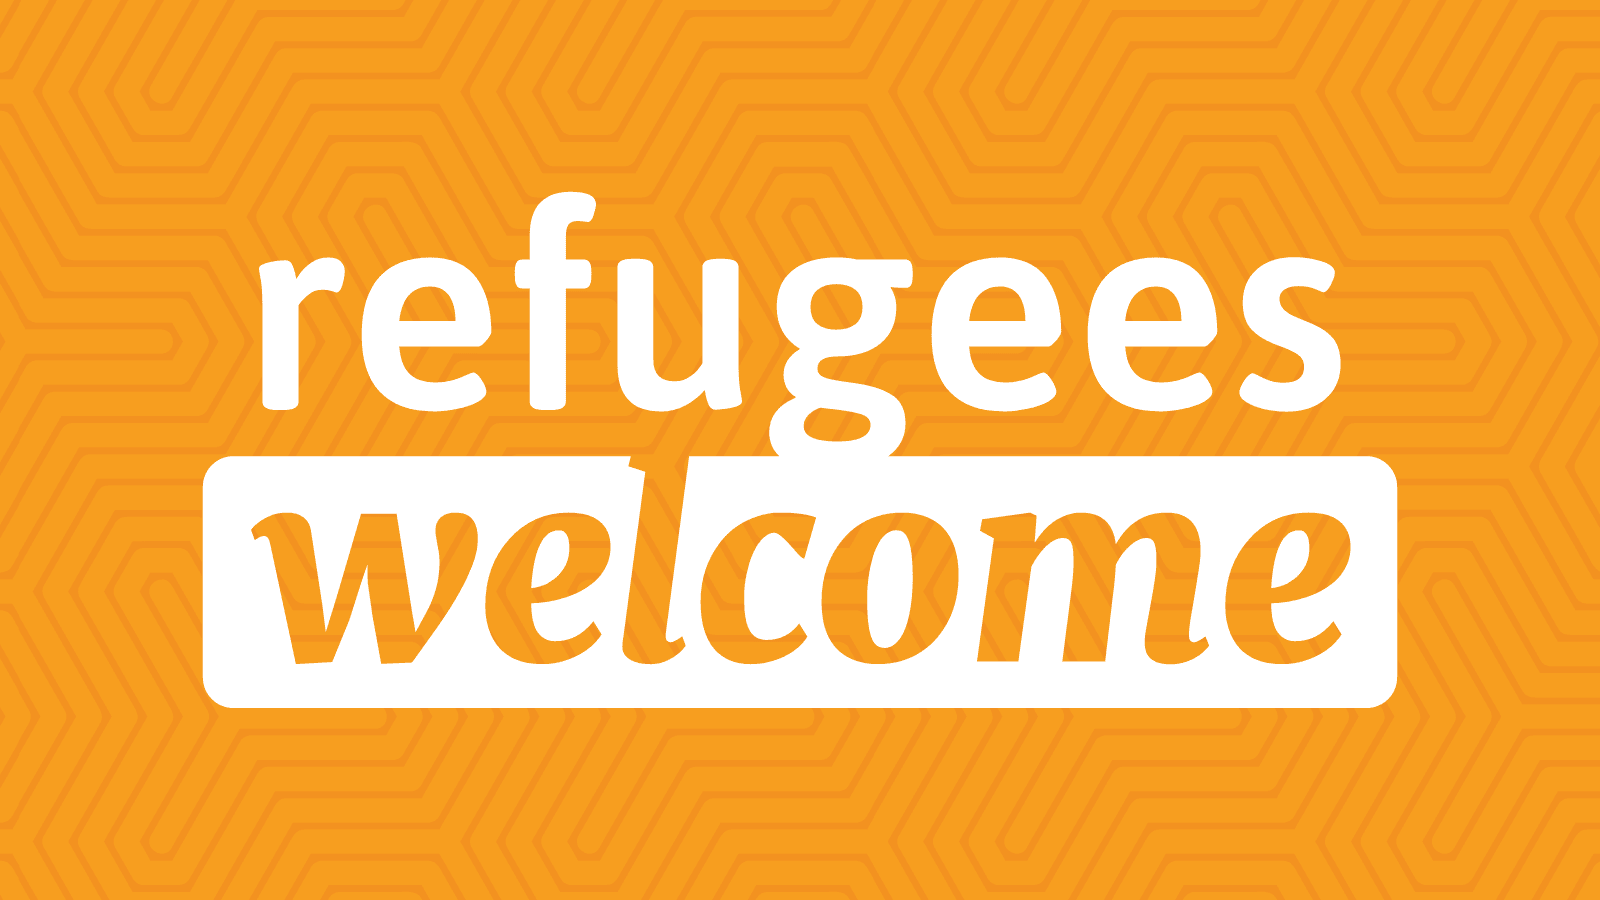 White text that reads "refugees welcome" on an orange background